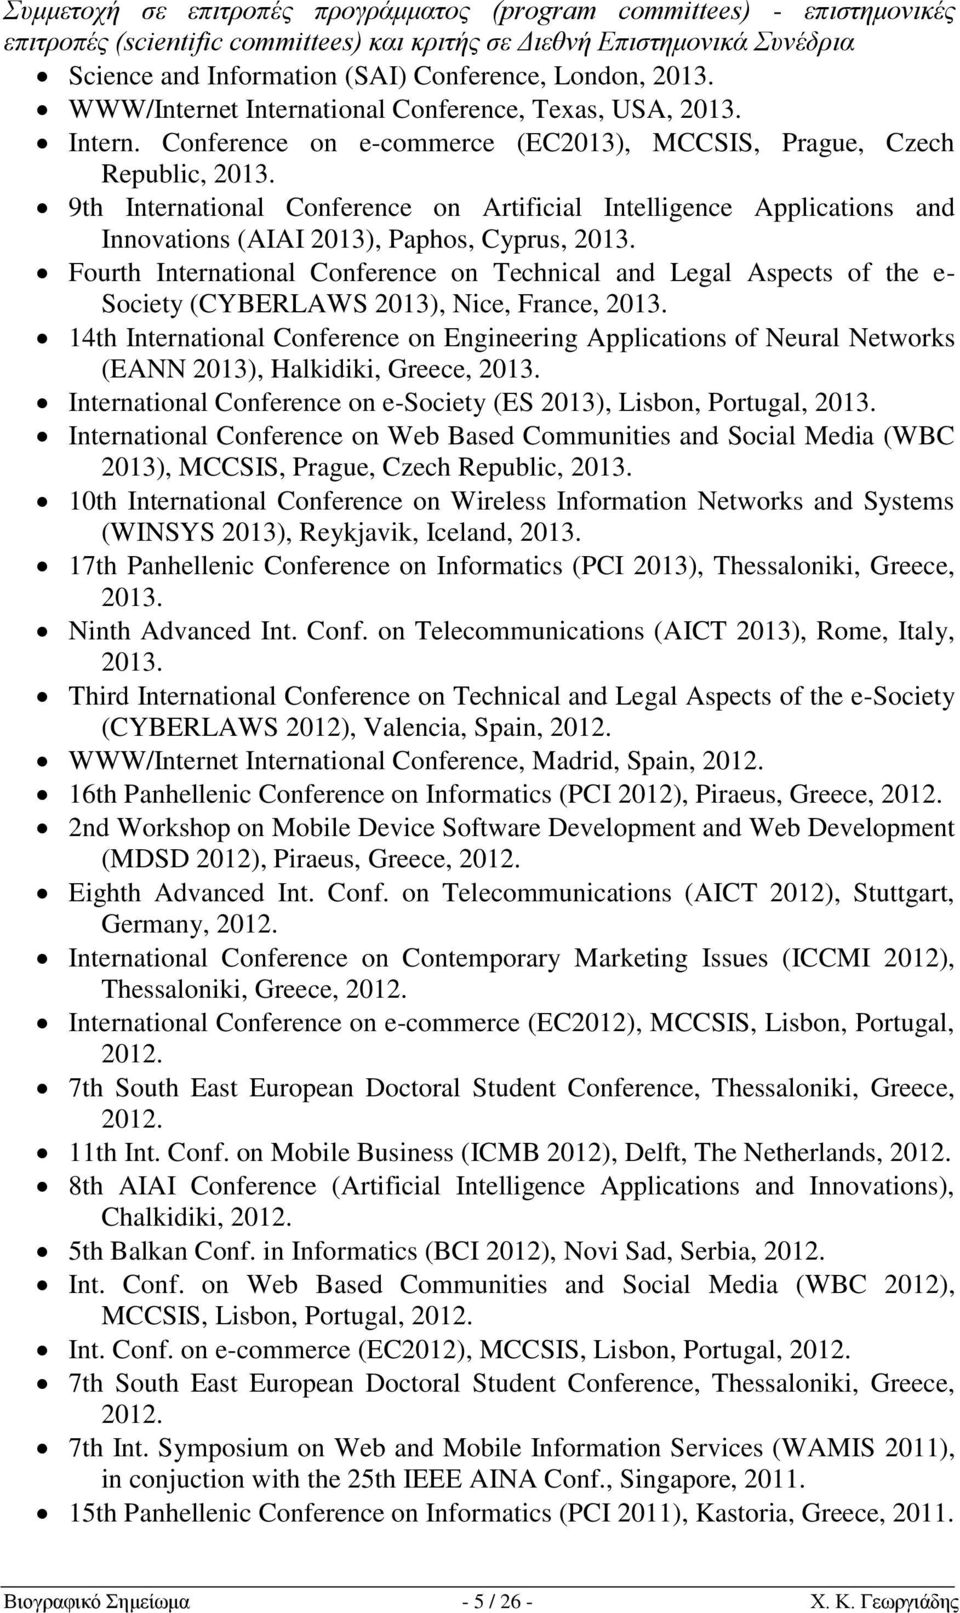 9th International Conference on Artificial Intelligence Applications and Innovations (AIAI 2013), Paphos, Cyprus, 2013.